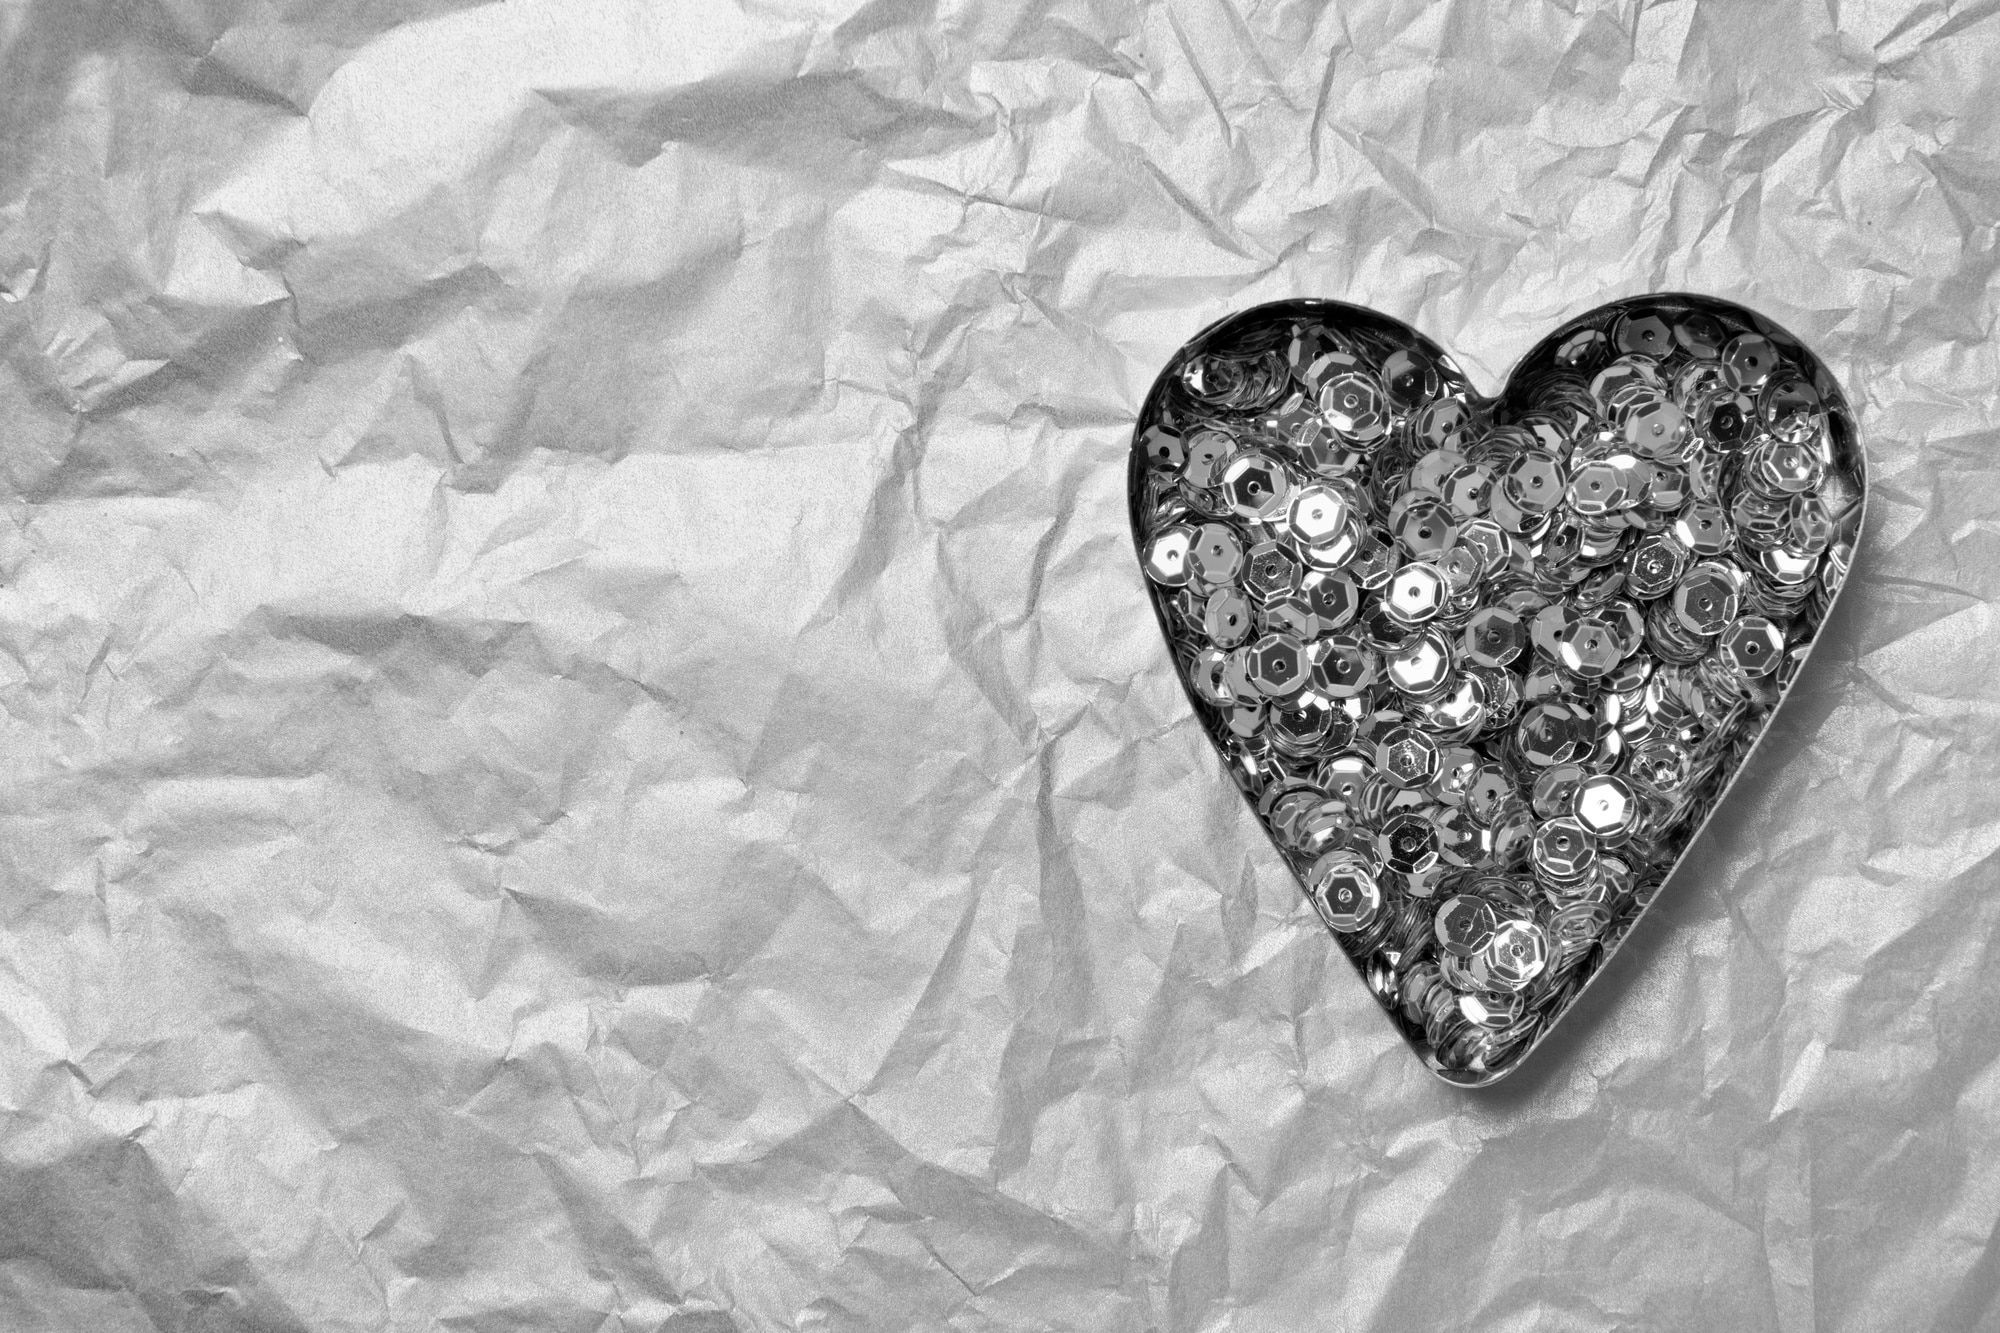 A heart made out of buttons on a crumpled piece of paper - Bling